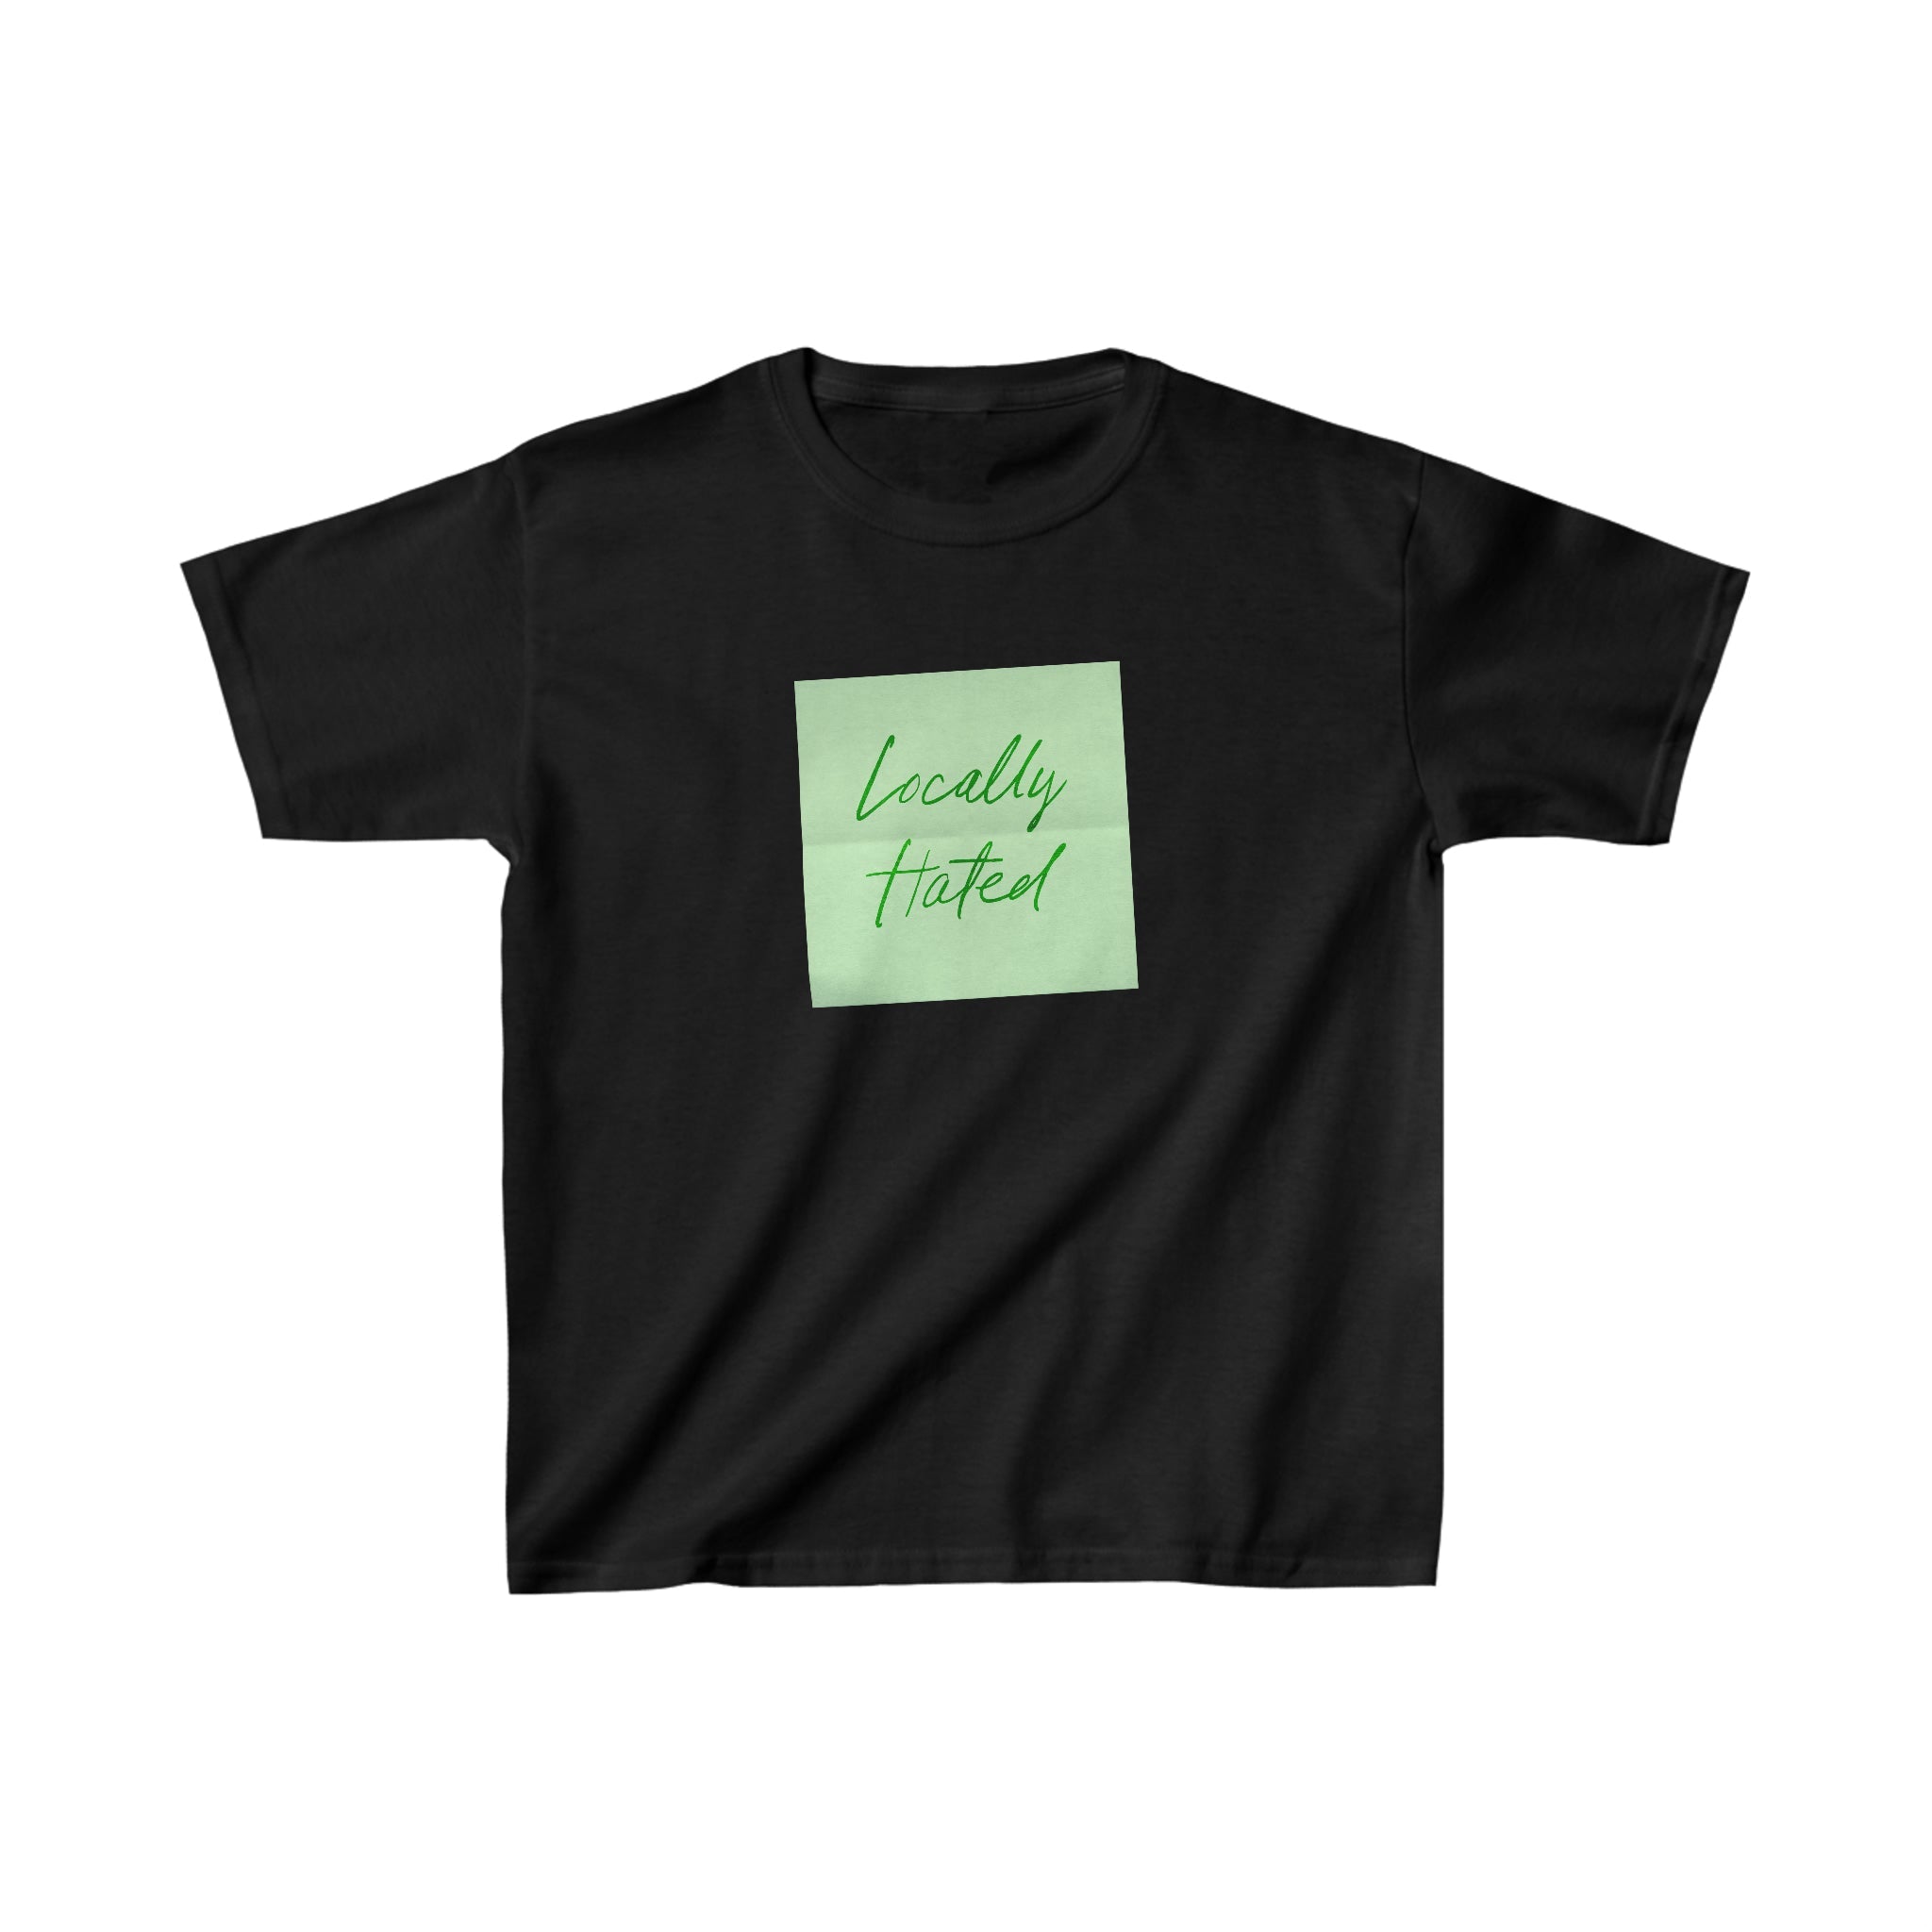 'Locally Hated' baby tee - In Print We Trust